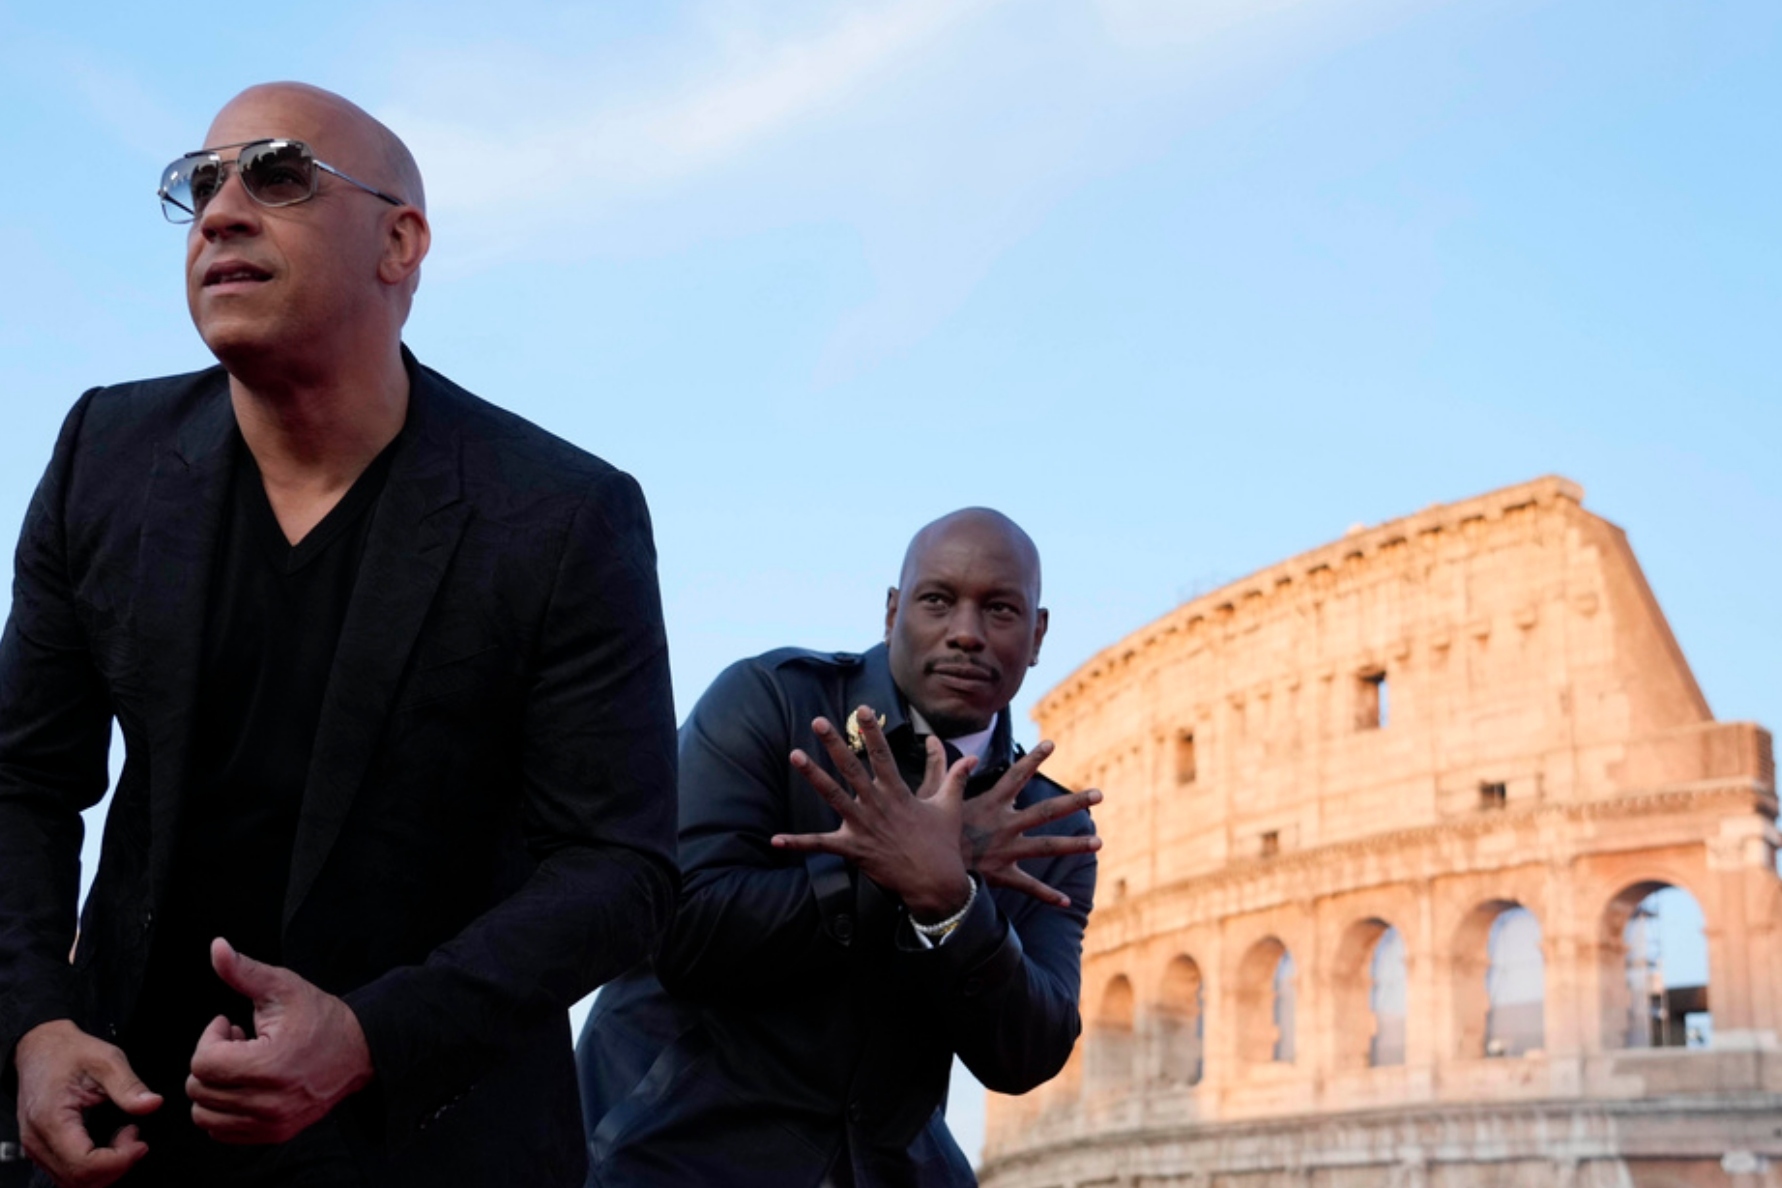 Vin Diesel and Michelle Rodriguez tease Fast and Furious final trilogy on Rome red carpet